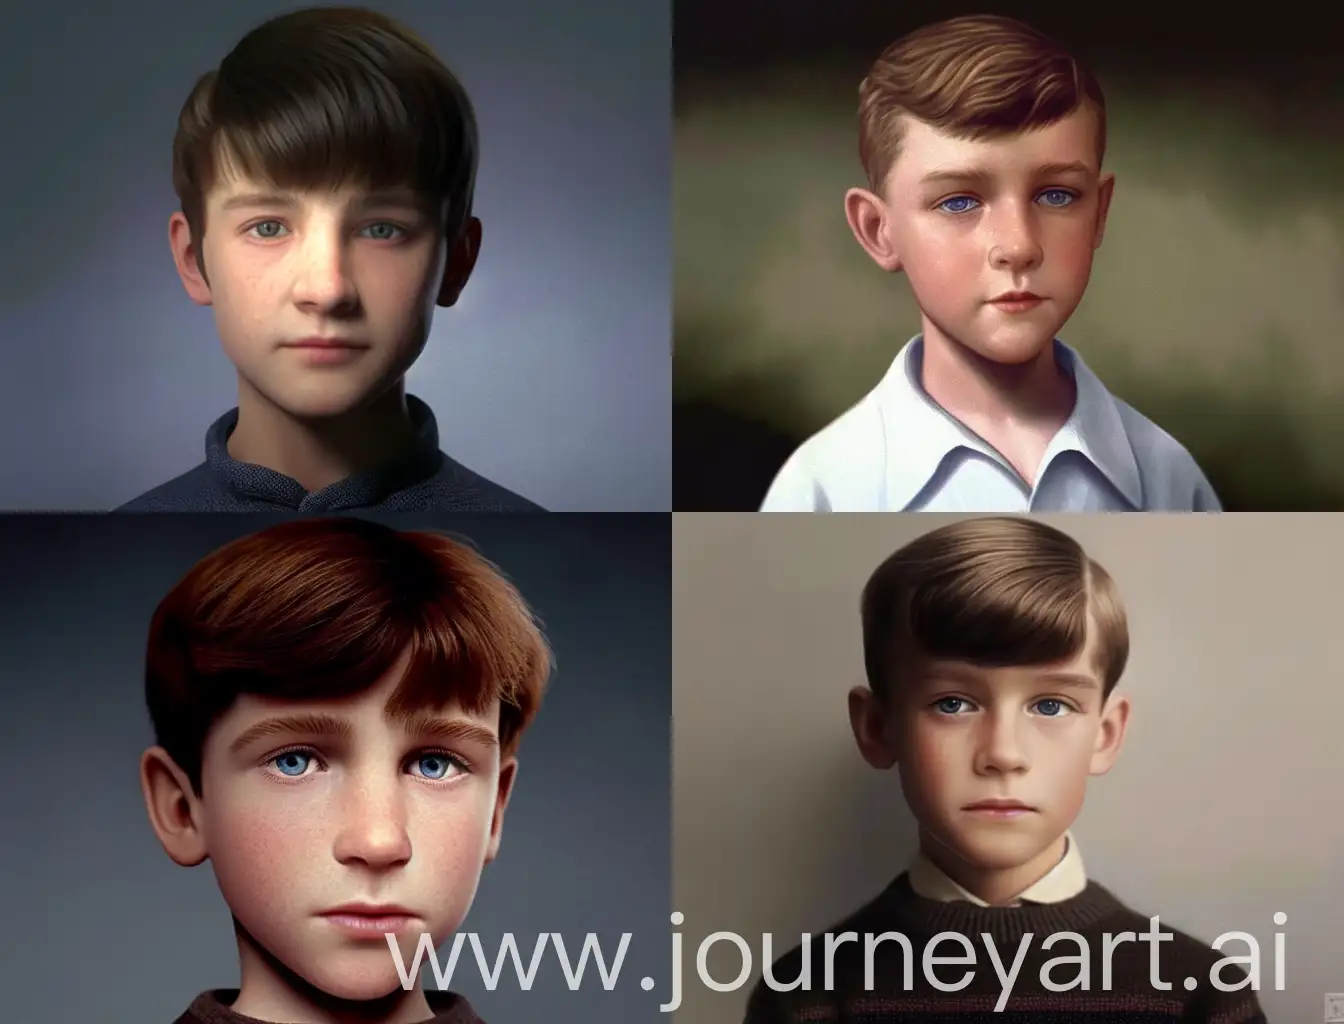 Made in a semi realistic style portrait a 1960s German boy ((Body: “Lean” + “Adequately built” + “Straight posture” + “Fair complexion” + “Small pimples” + “Scars on his hands from factory work”))] [(Hair: “Dark brown, neatly combed”)] [(Eyes: “Sharp, calculating blue eyes”)] [(Clothes: “Simple attire, often in shades of gray and red” + “Plain button-down shirts” + “Trousers”))